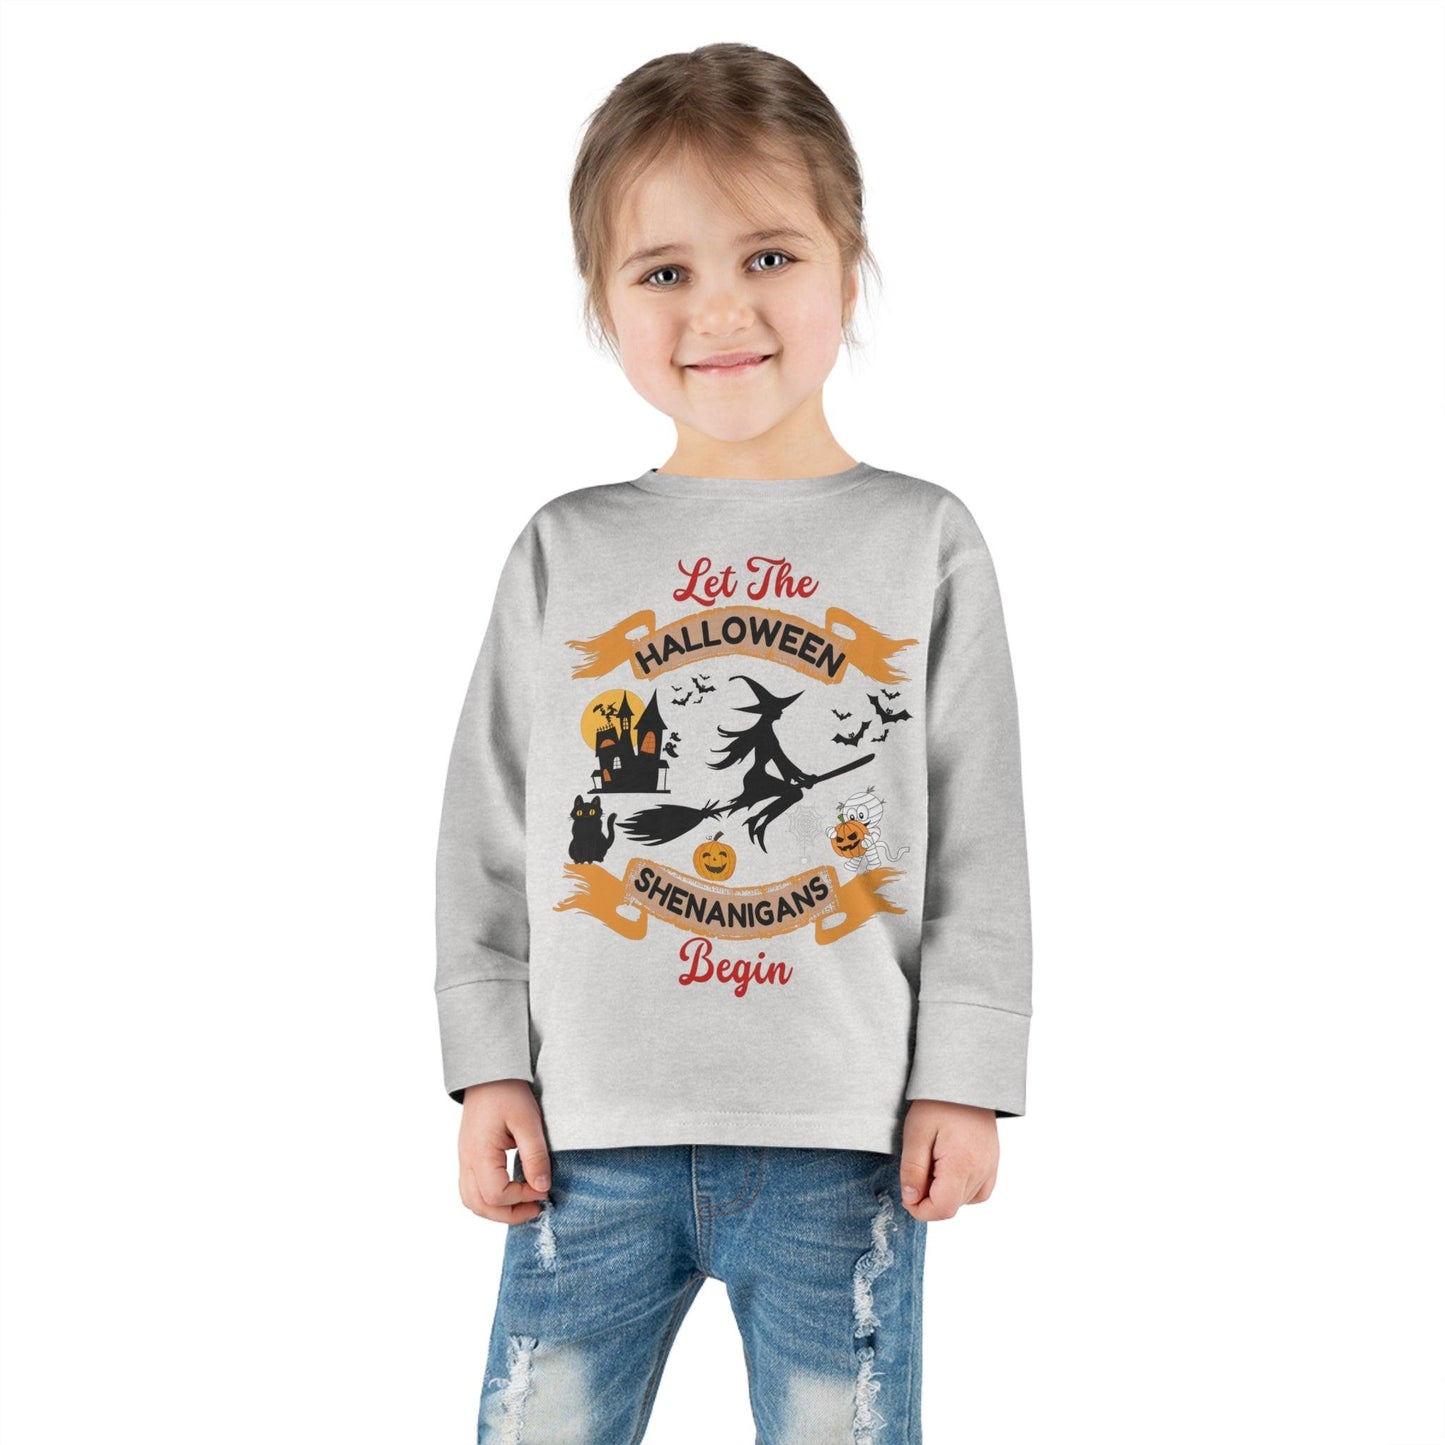 Let the Halloween Shenanigan Begin Kids Shirt Kids Halloween Costume Kids Trick or Treat Outfit for Halloween - Giftsmojo